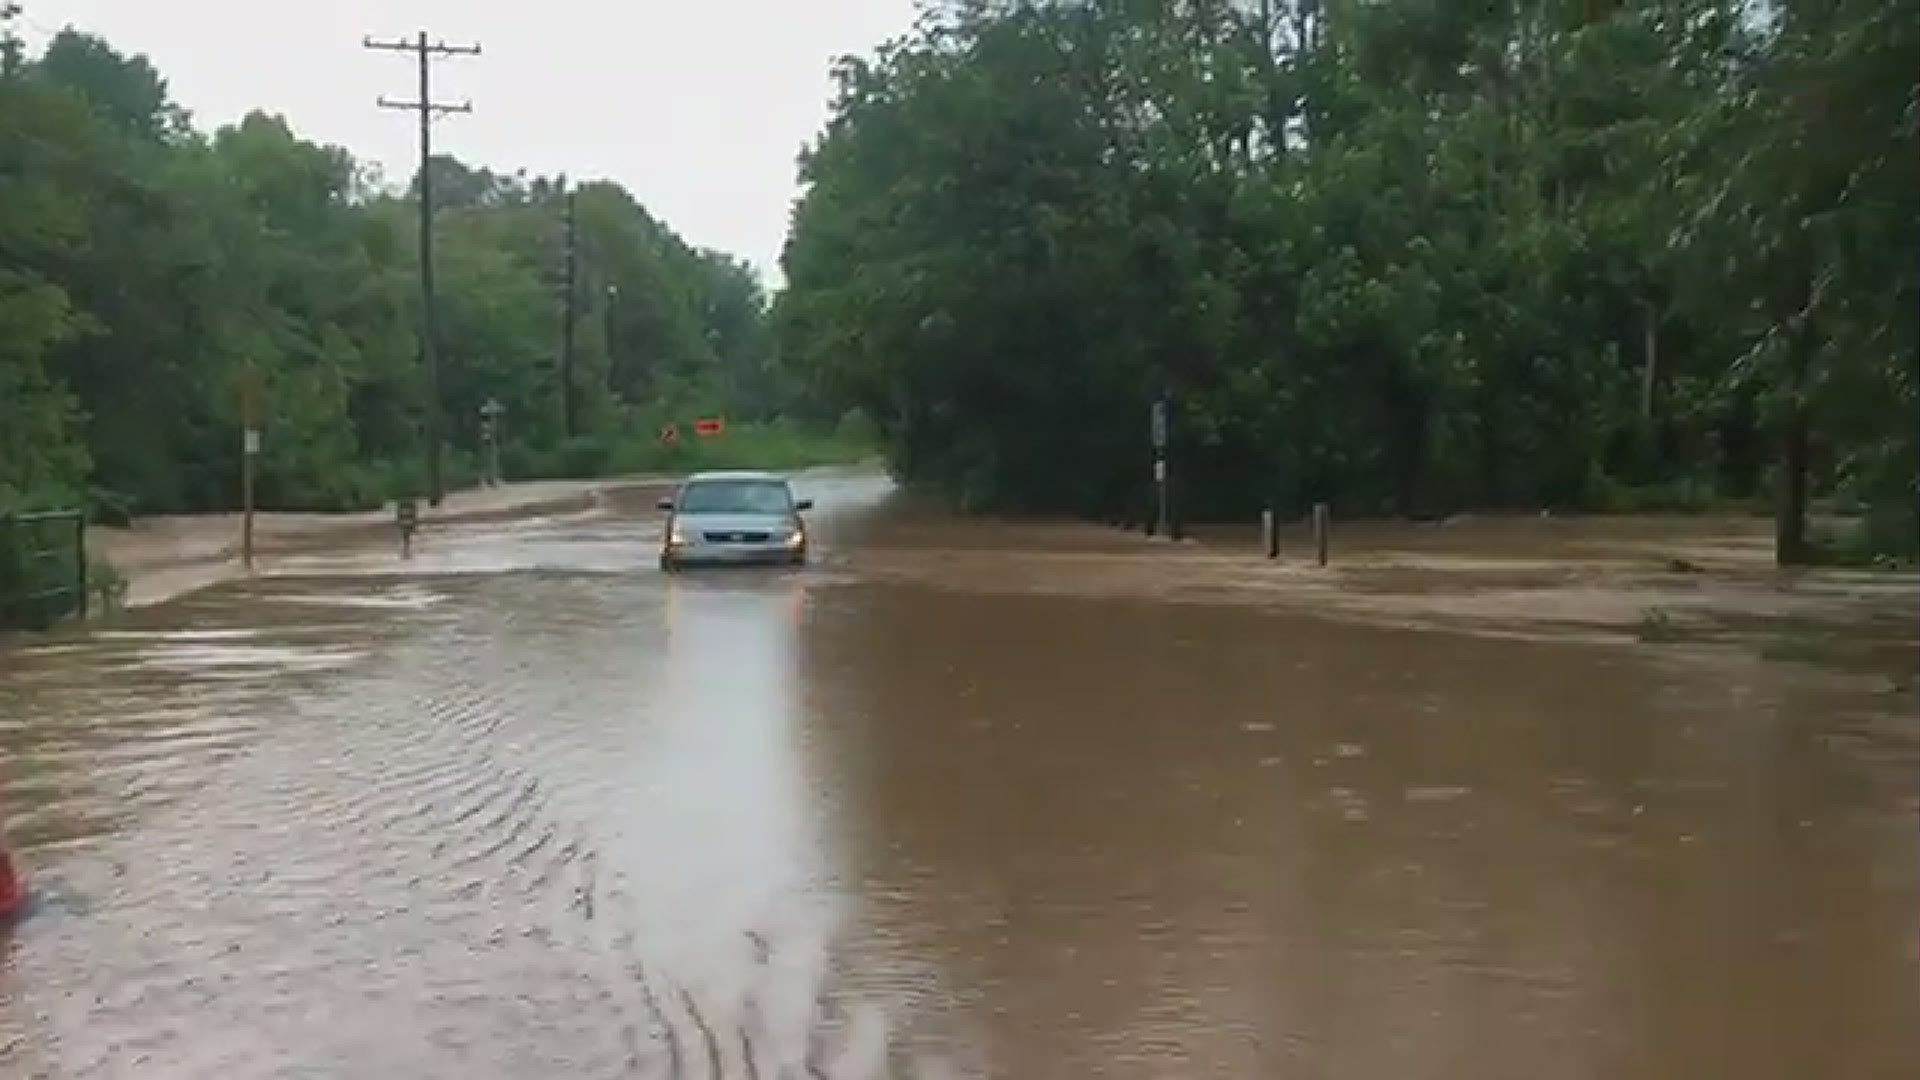 Flash flooding at Bethabara Road and Old Town Drive in Winston-Salem captured by Winston-Salem Fire Department.